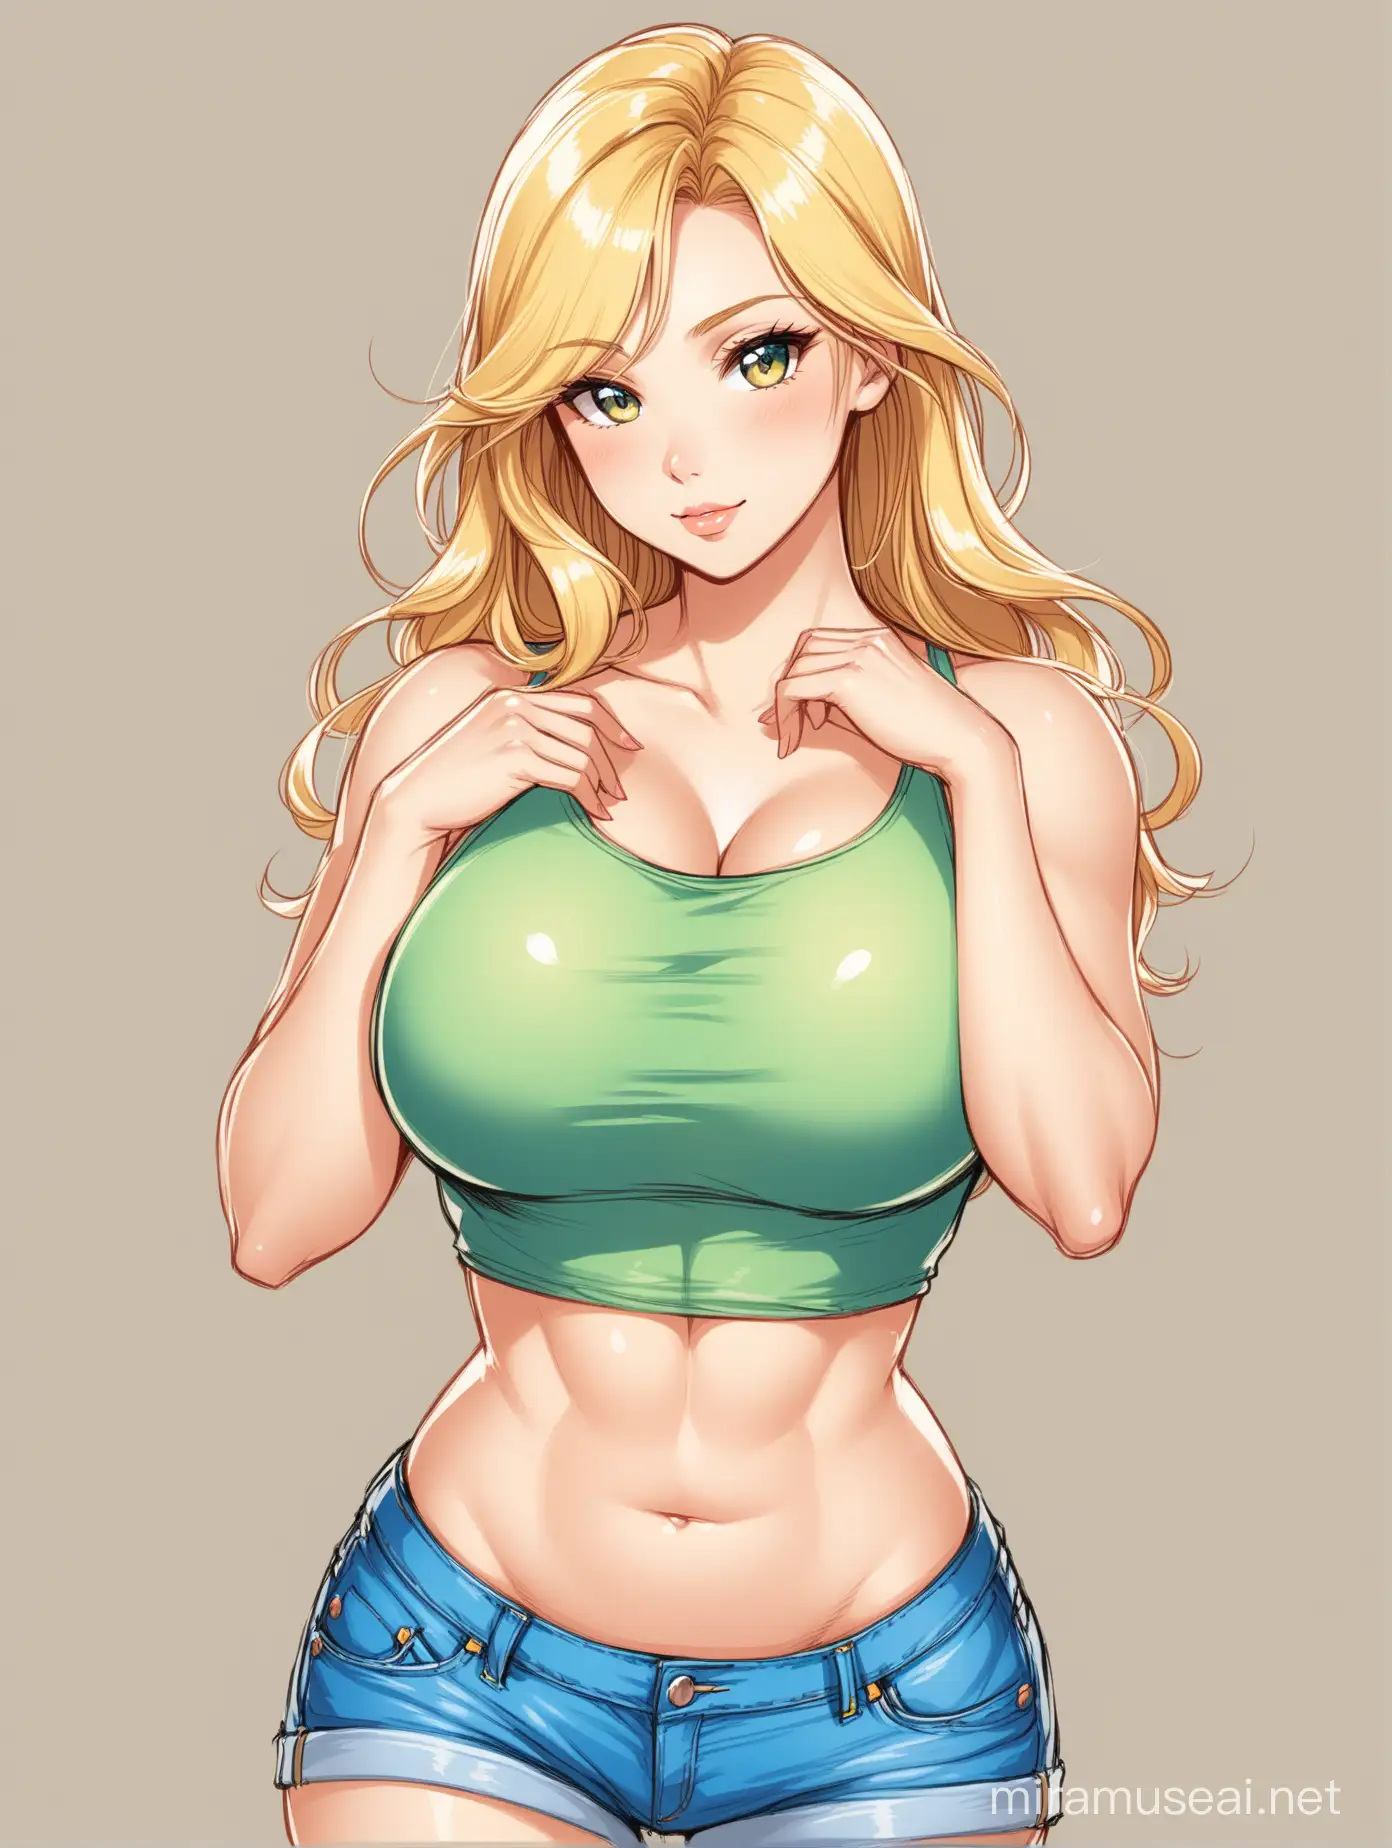 Full color drawing of a blond woman with a beautiful, delicate face, huge chest, making a sexy pose, showing off her beautiful body, wearing casual clothing, including a top and jean shorts.